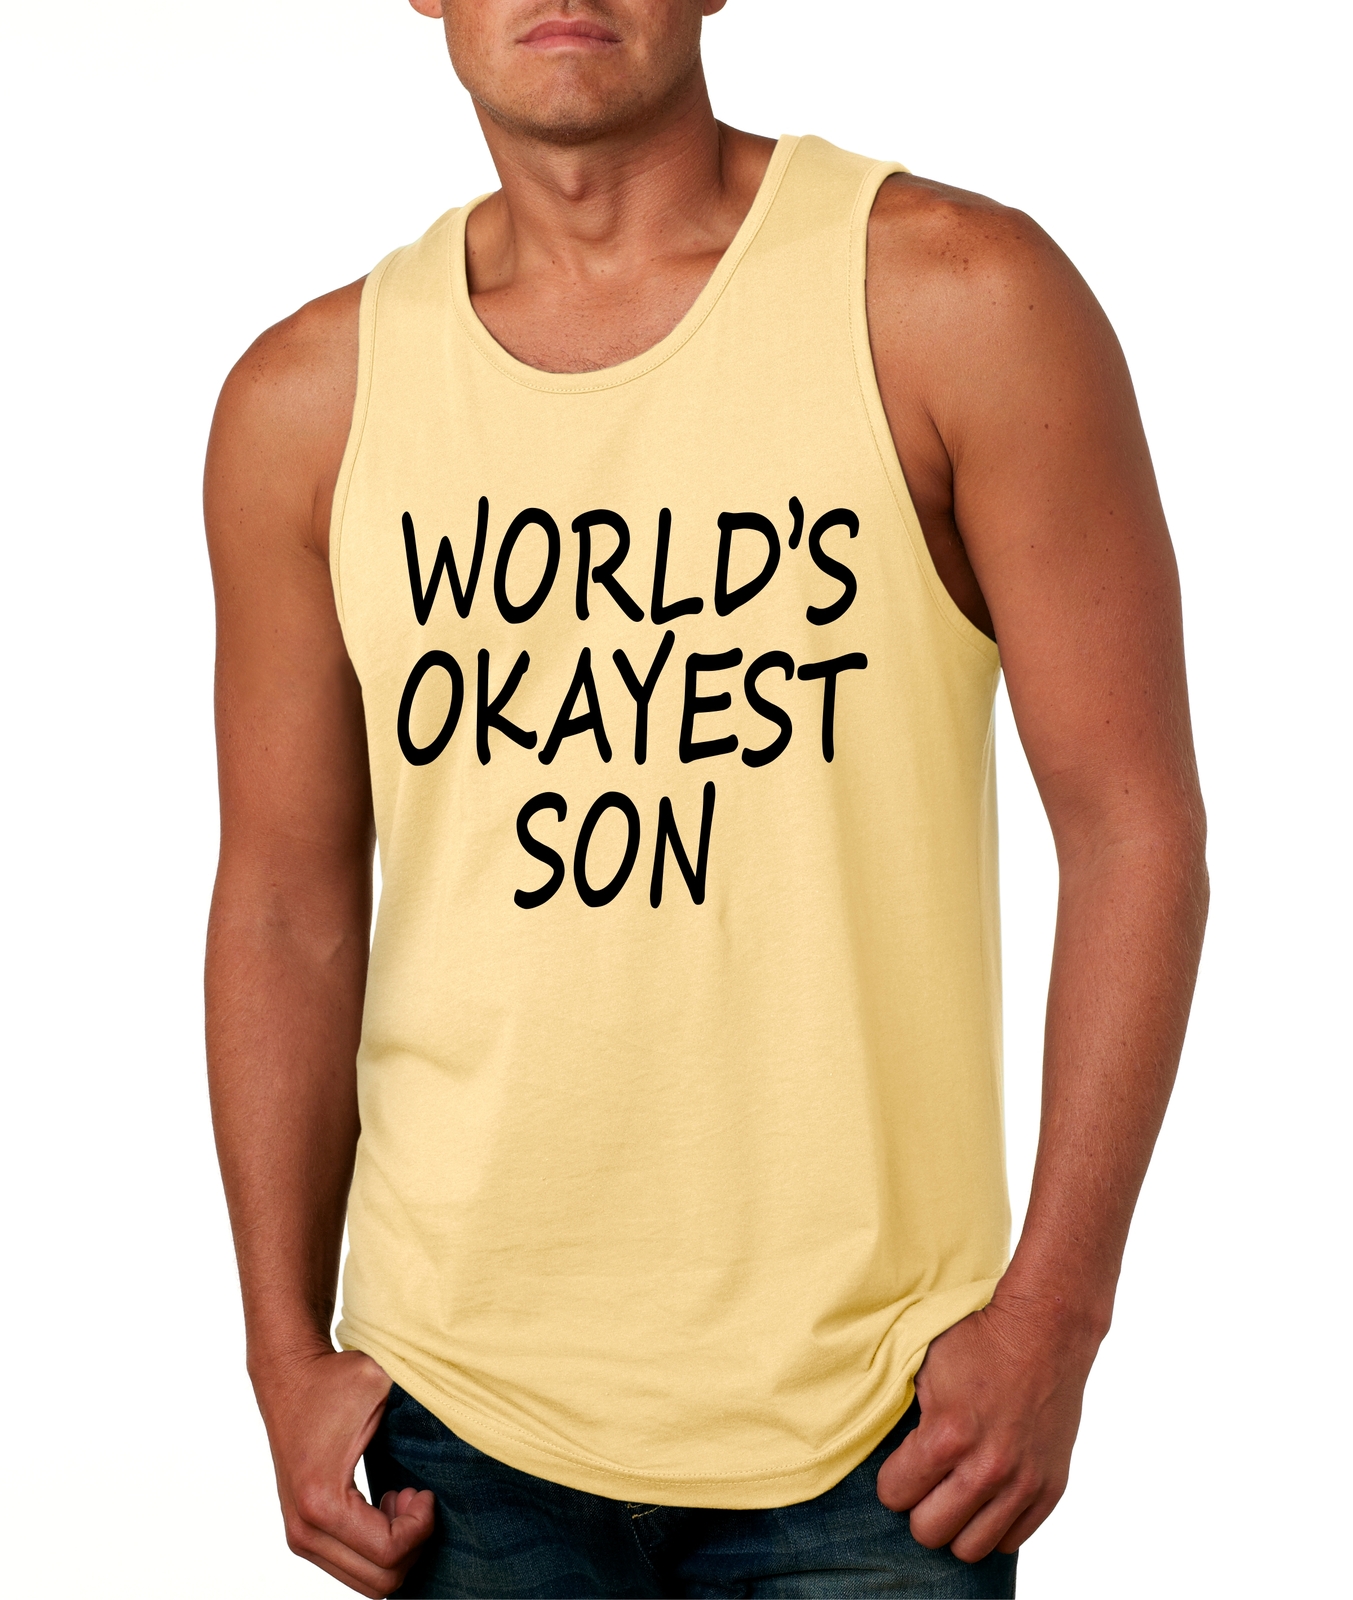 Primary image for Men's Tank Top World's Okayest Son Cool Funny Top